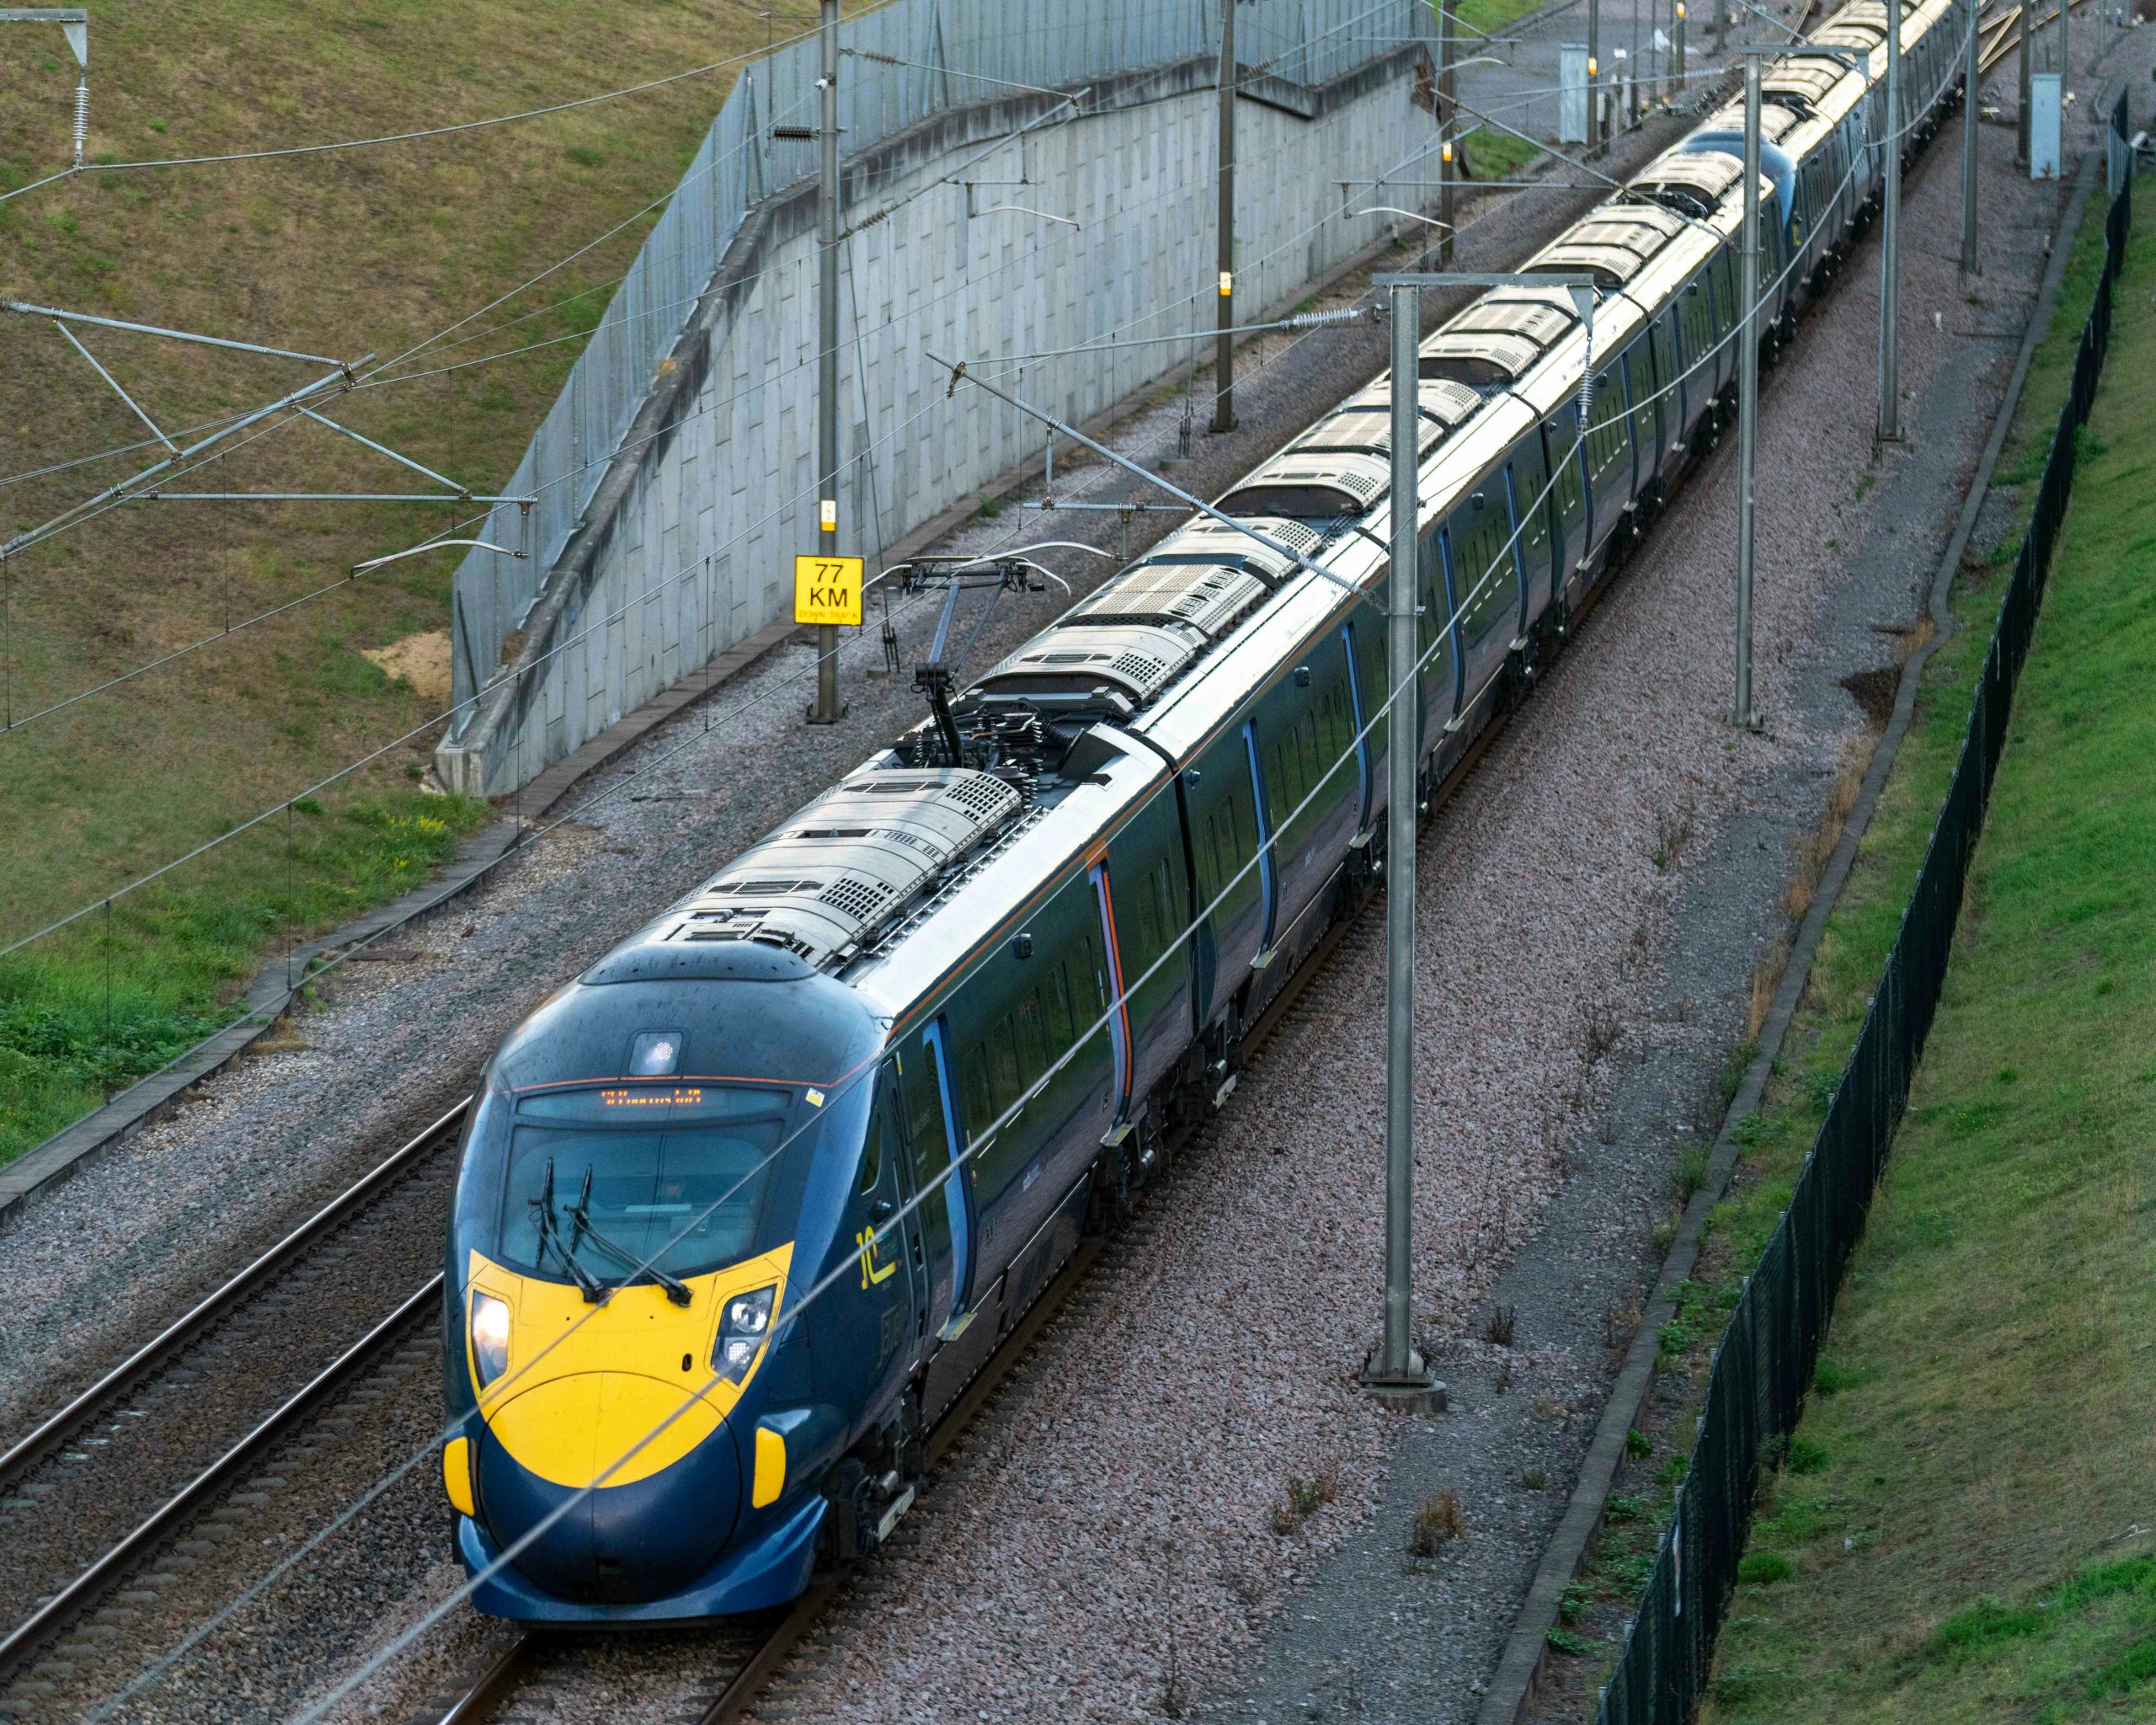 Curtailing HS2 is the wrong decision for Britain’s future, says Sustainable Transport Midlands